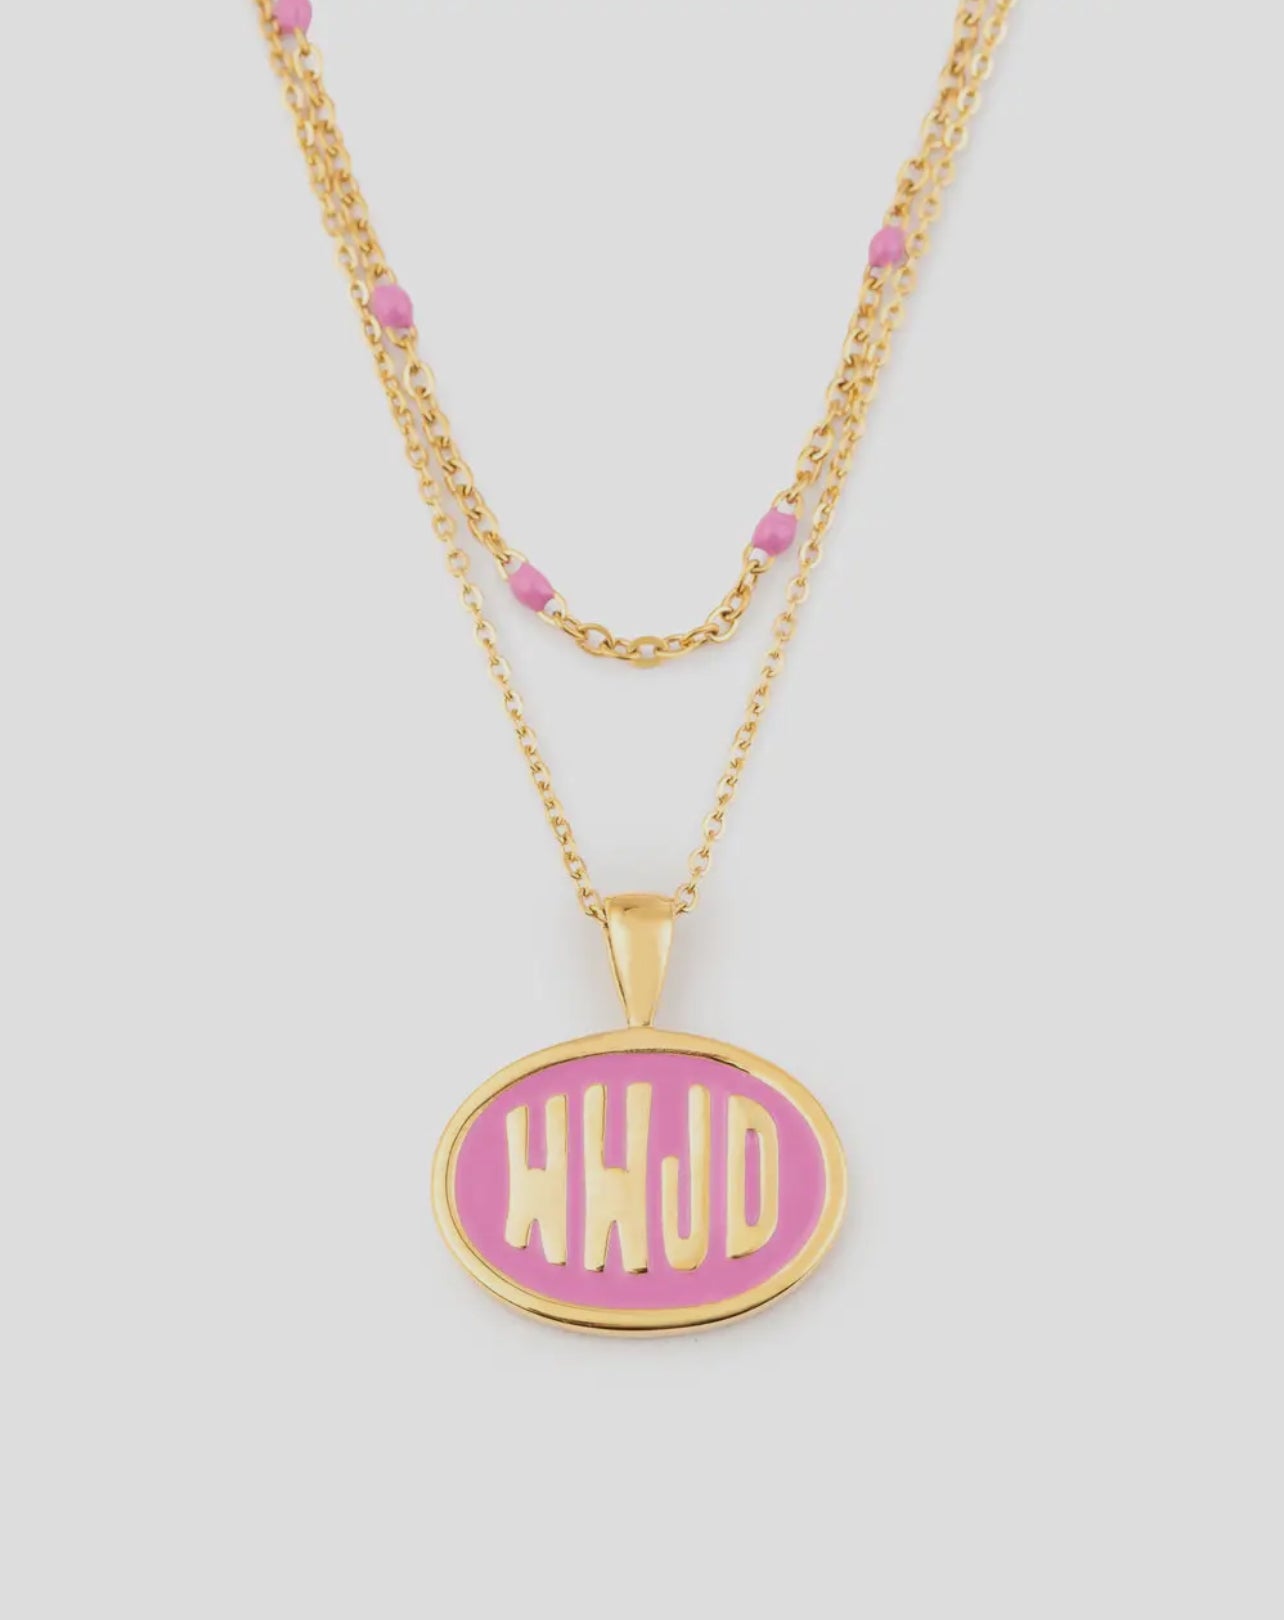 WWJD layered necklace